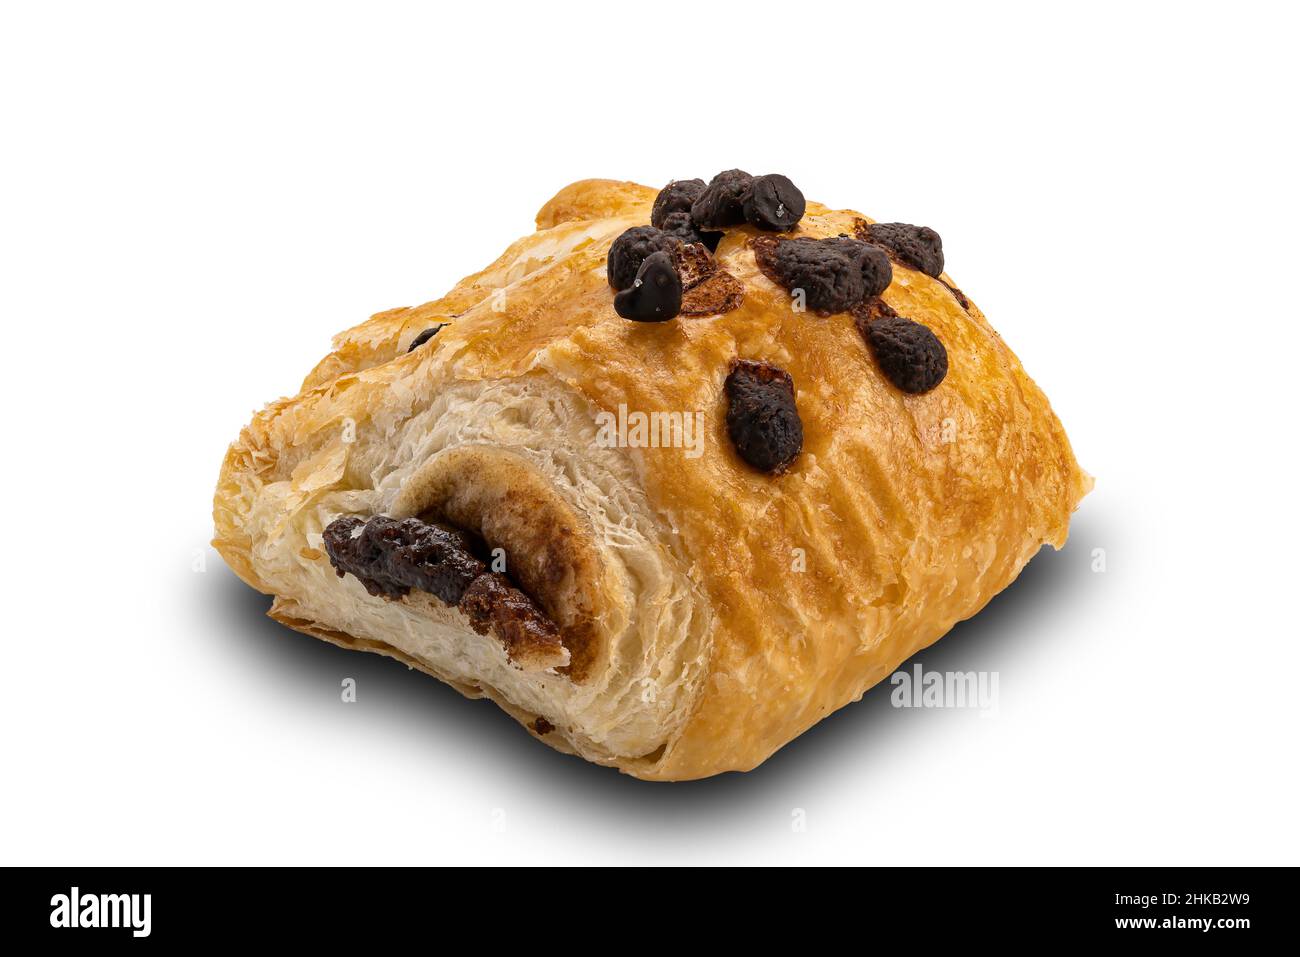 Side view a piece of Danish Pastry with chocolate filling topping with chocolate chips isolated on white background with clipping path. Stock Photo